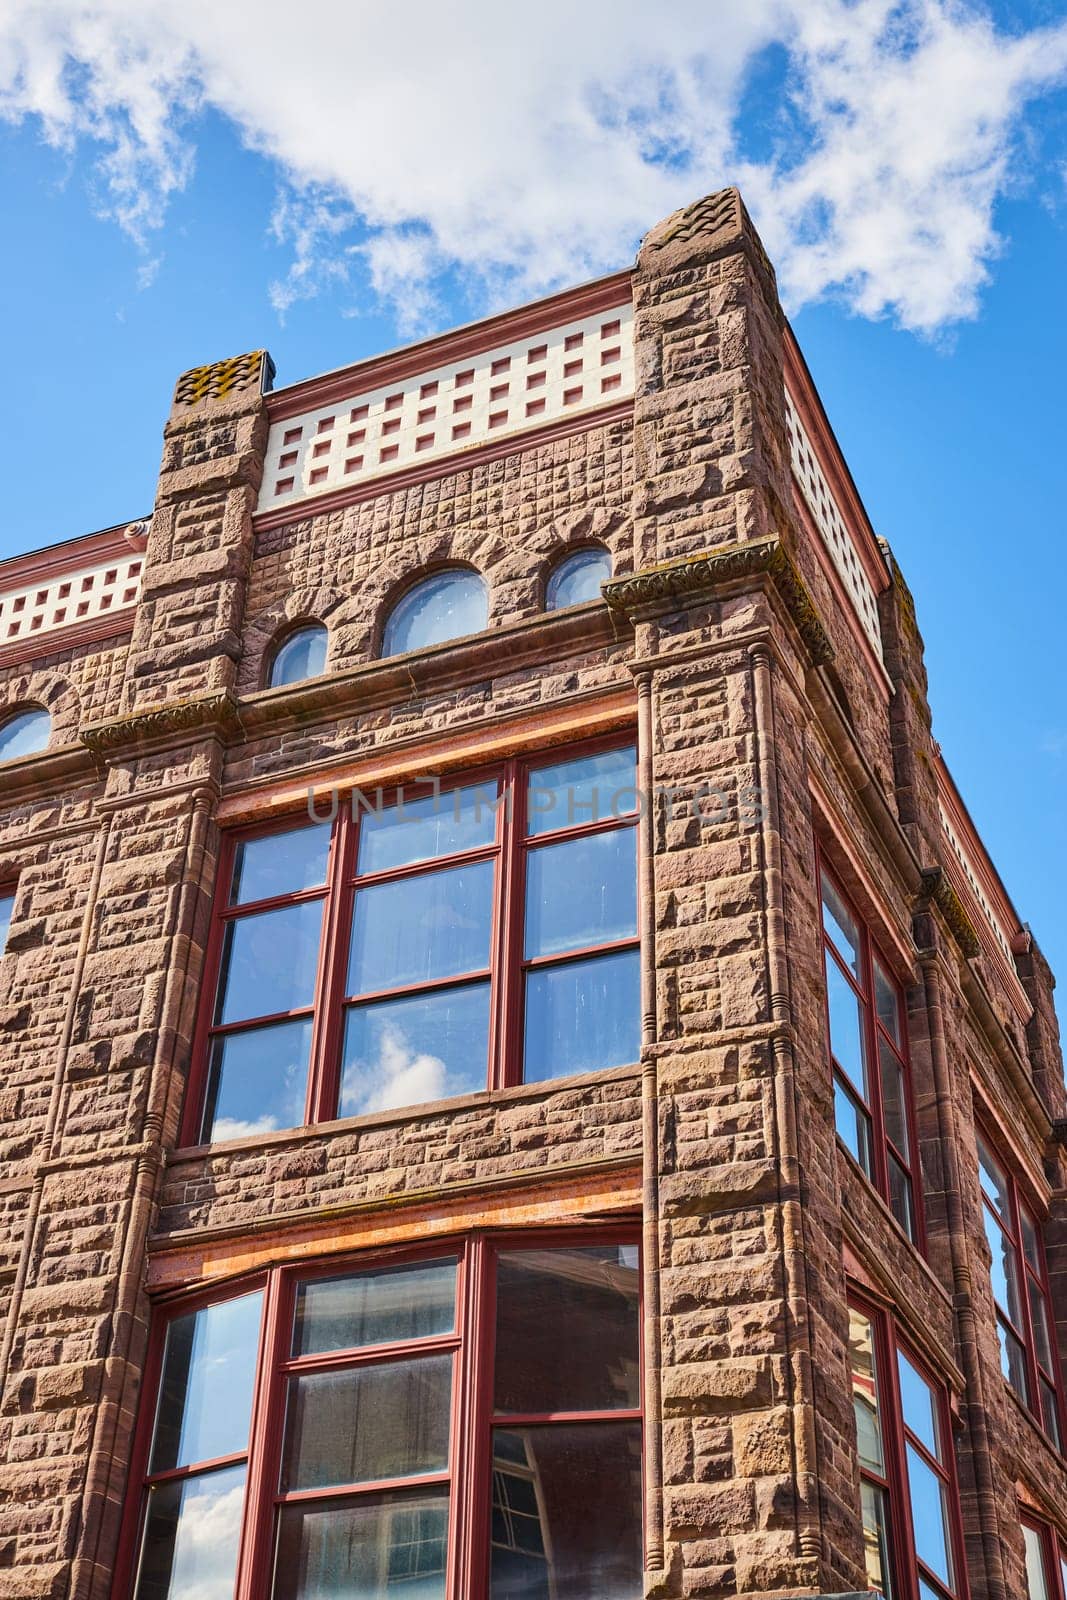 Sandstone Building Elegance with Arched Windows, Sunny Sky - Upward View by njproductions